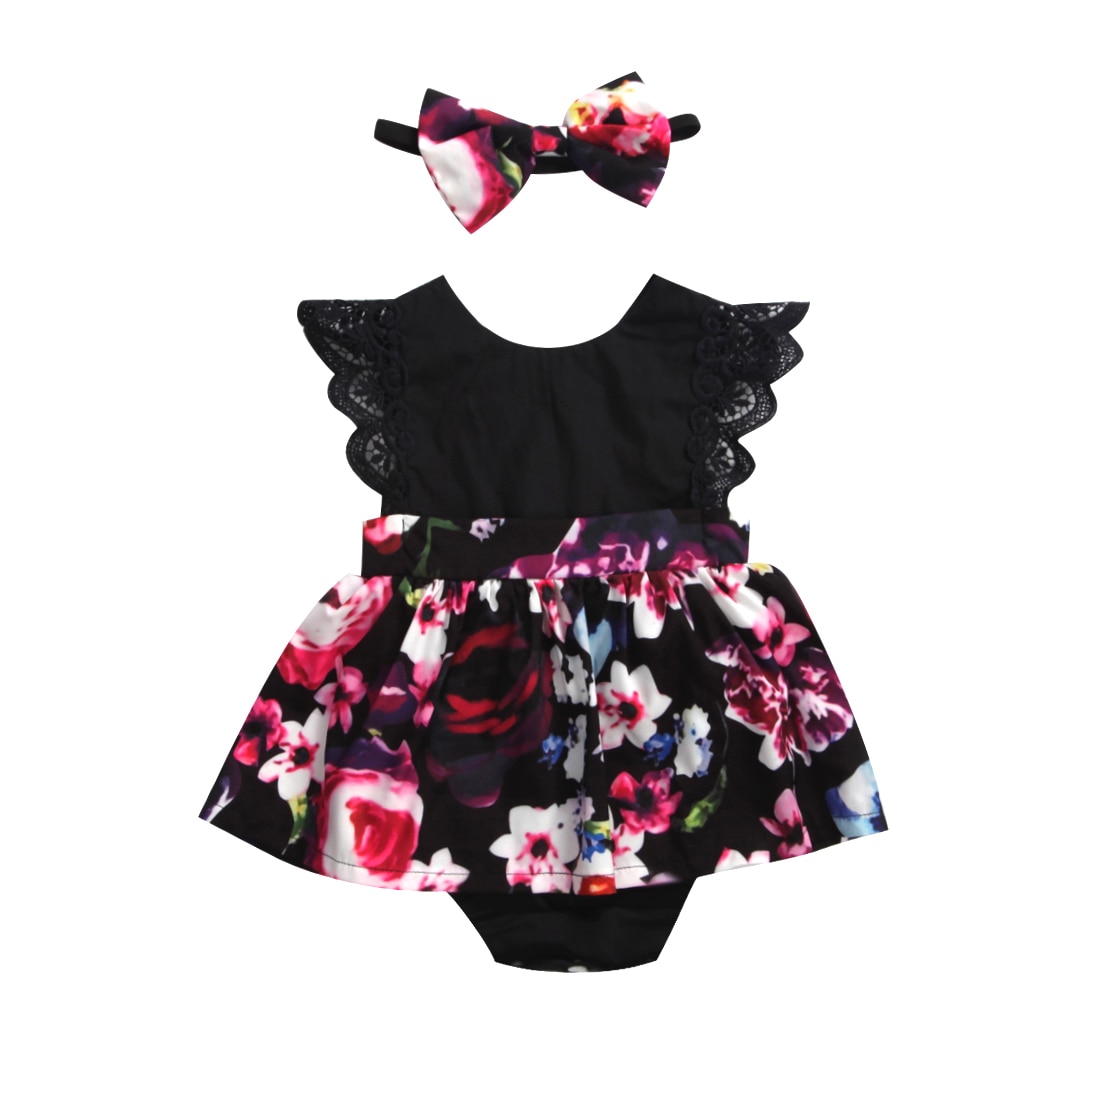 Baby Girl Romper Tutu Dress with Floral Outfit and Headband for Parties by Focusnormborn